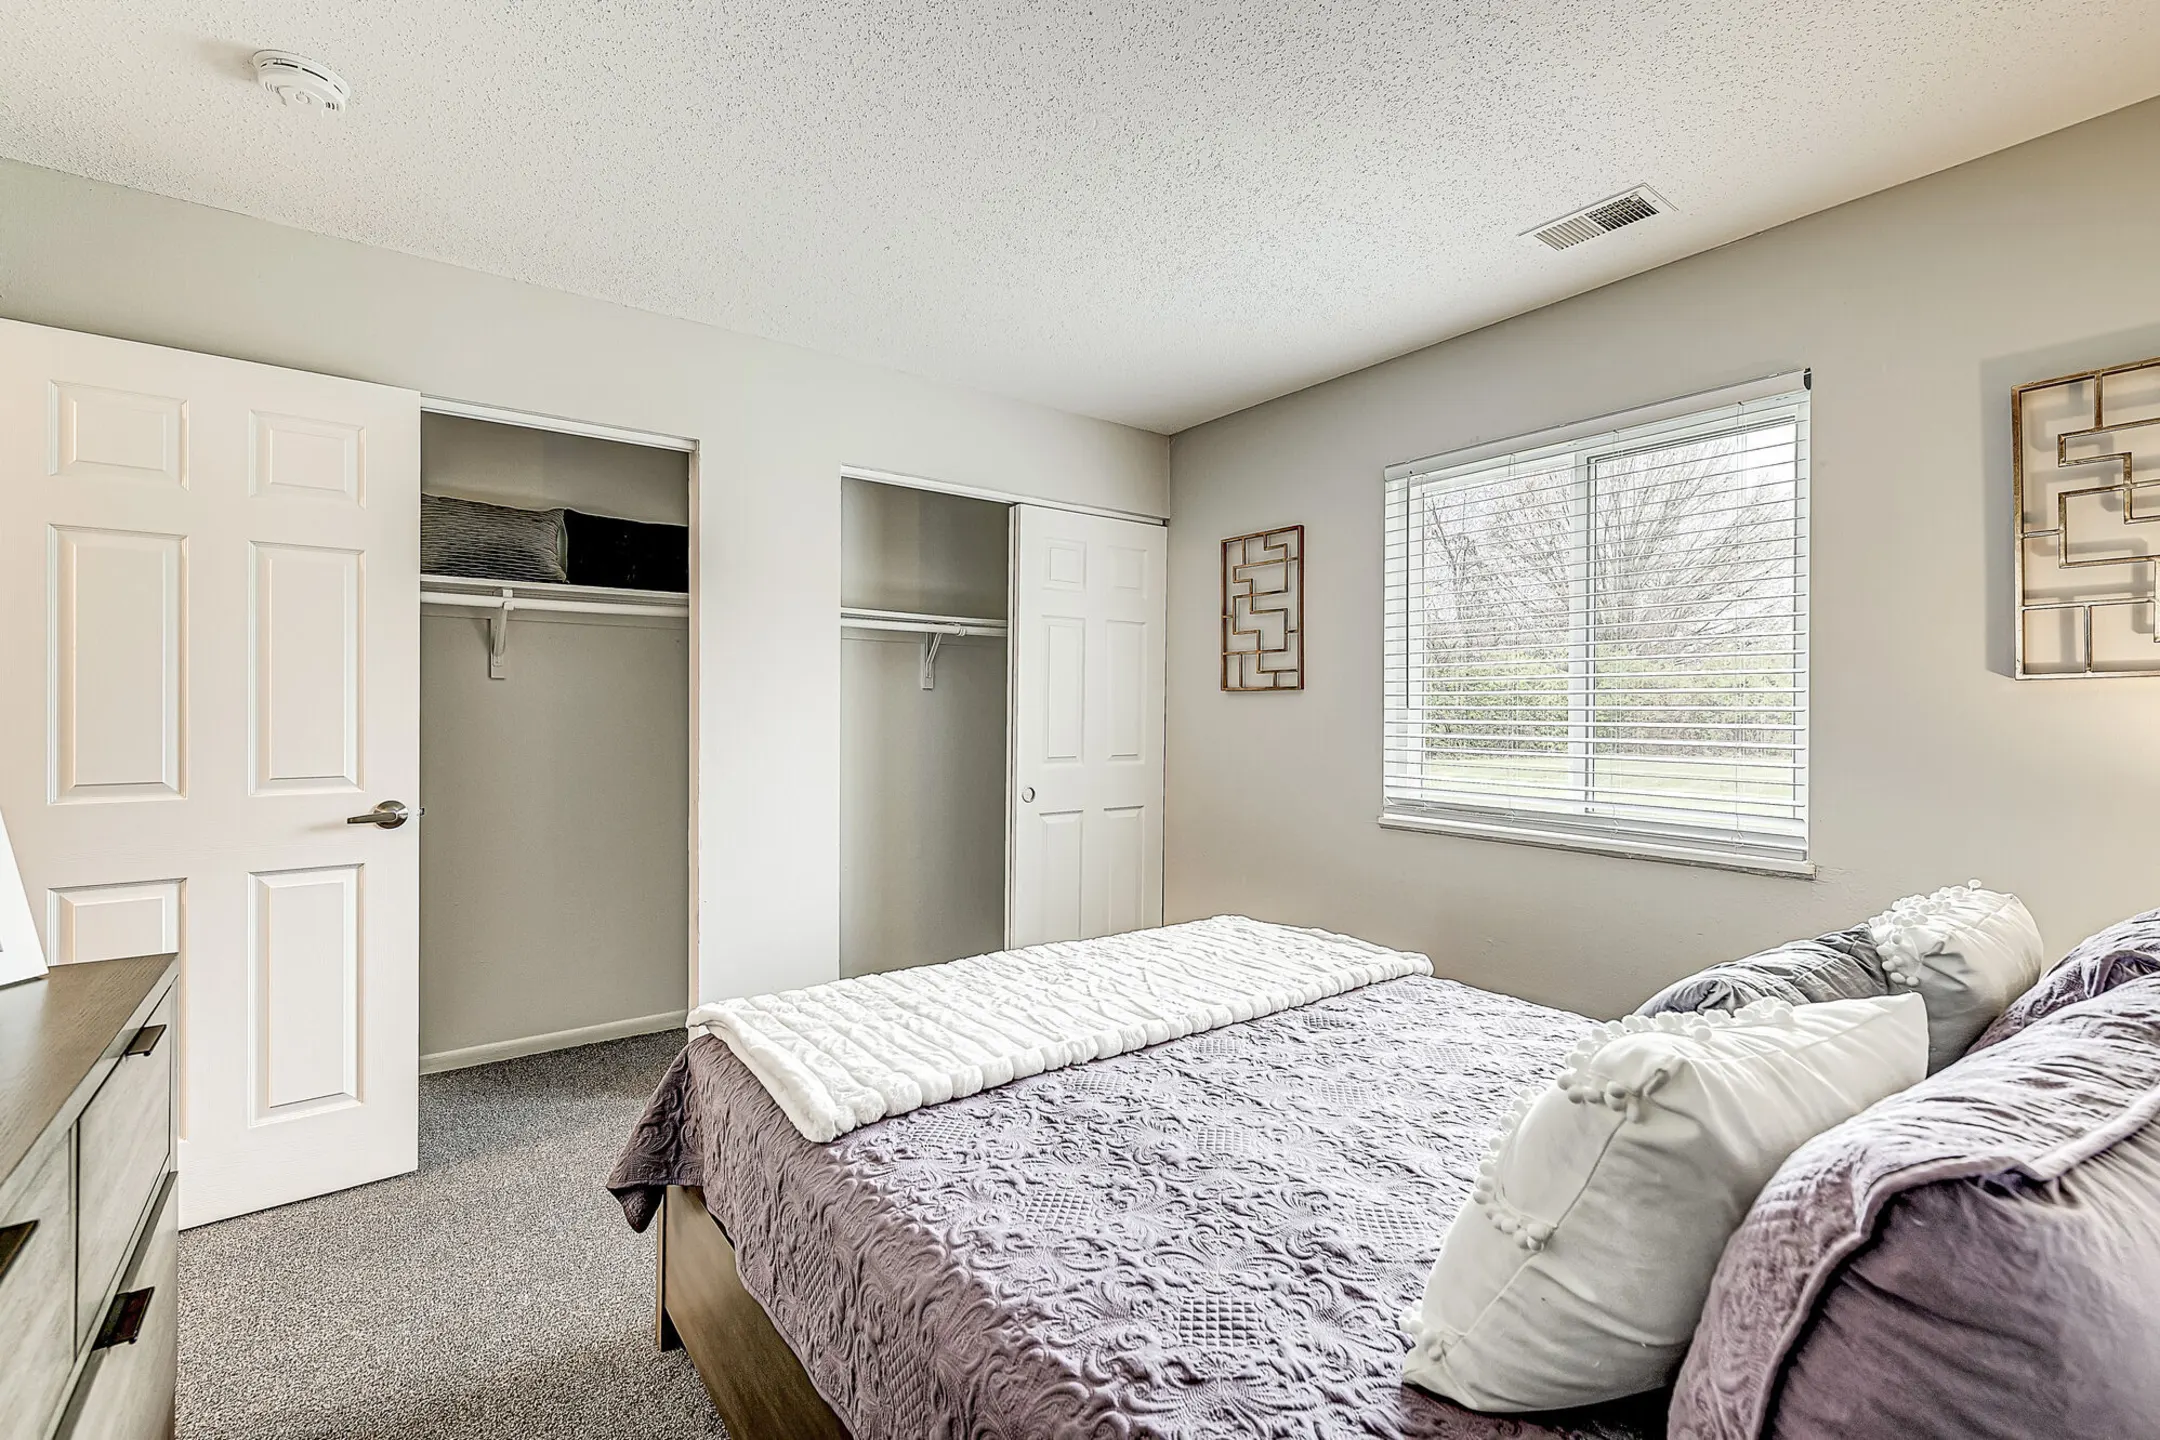 Bedroom - Ninth Ave Apartments - Indianapolis, IN